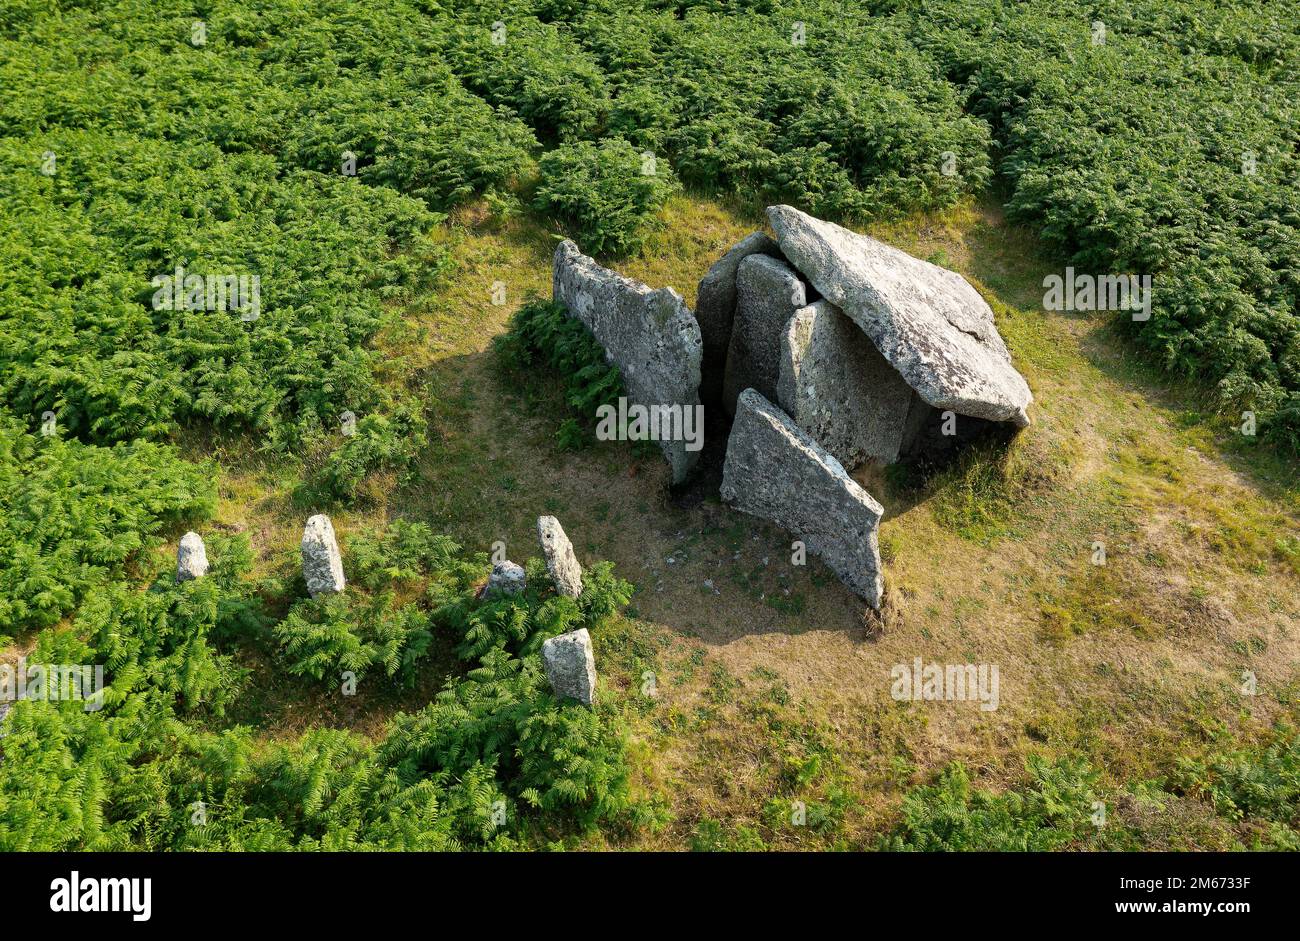 Zennor Quoit prehistoric entrance grave chambered tomb. Penwith peninsula, Cornwall. Aerial showing entrance façade, chamber uprights, capstone etc. Stock Photo